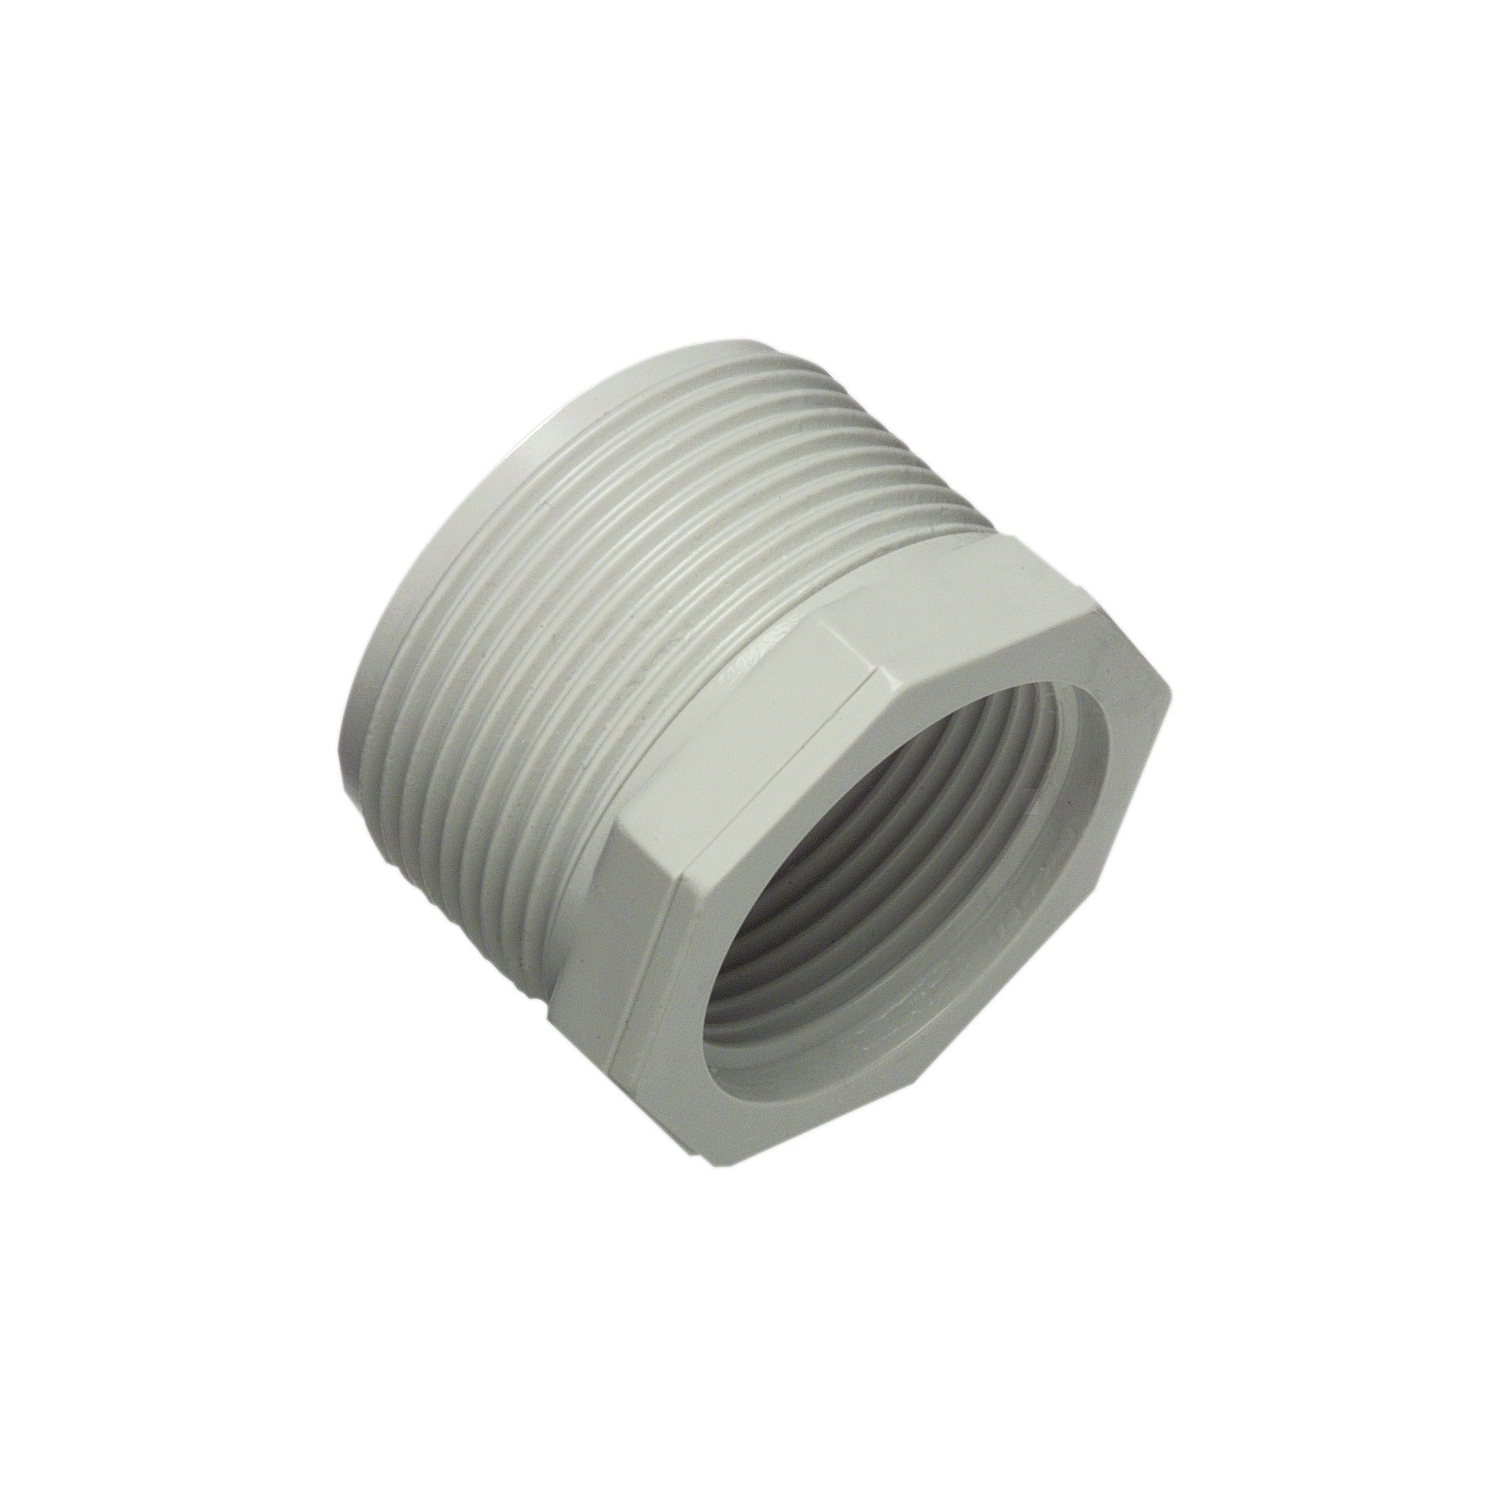 Solid Fittings - PVC, Screwed Reducers, 40mm - 32mm, Grey